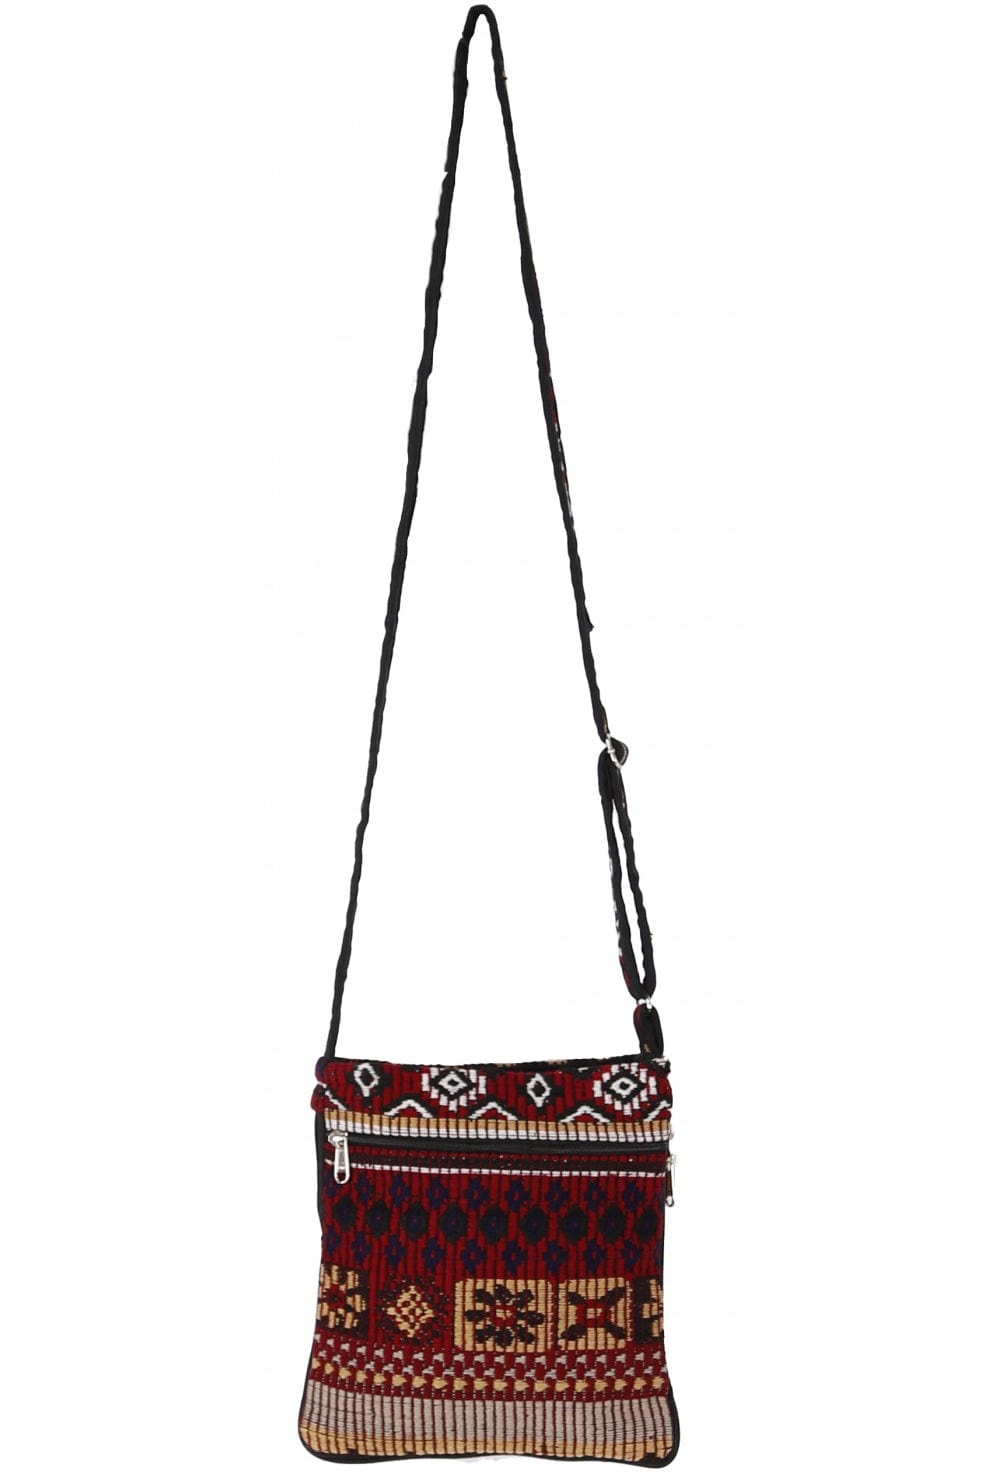 Bags Woven Jacquard - Red and Brown - Purse 102521